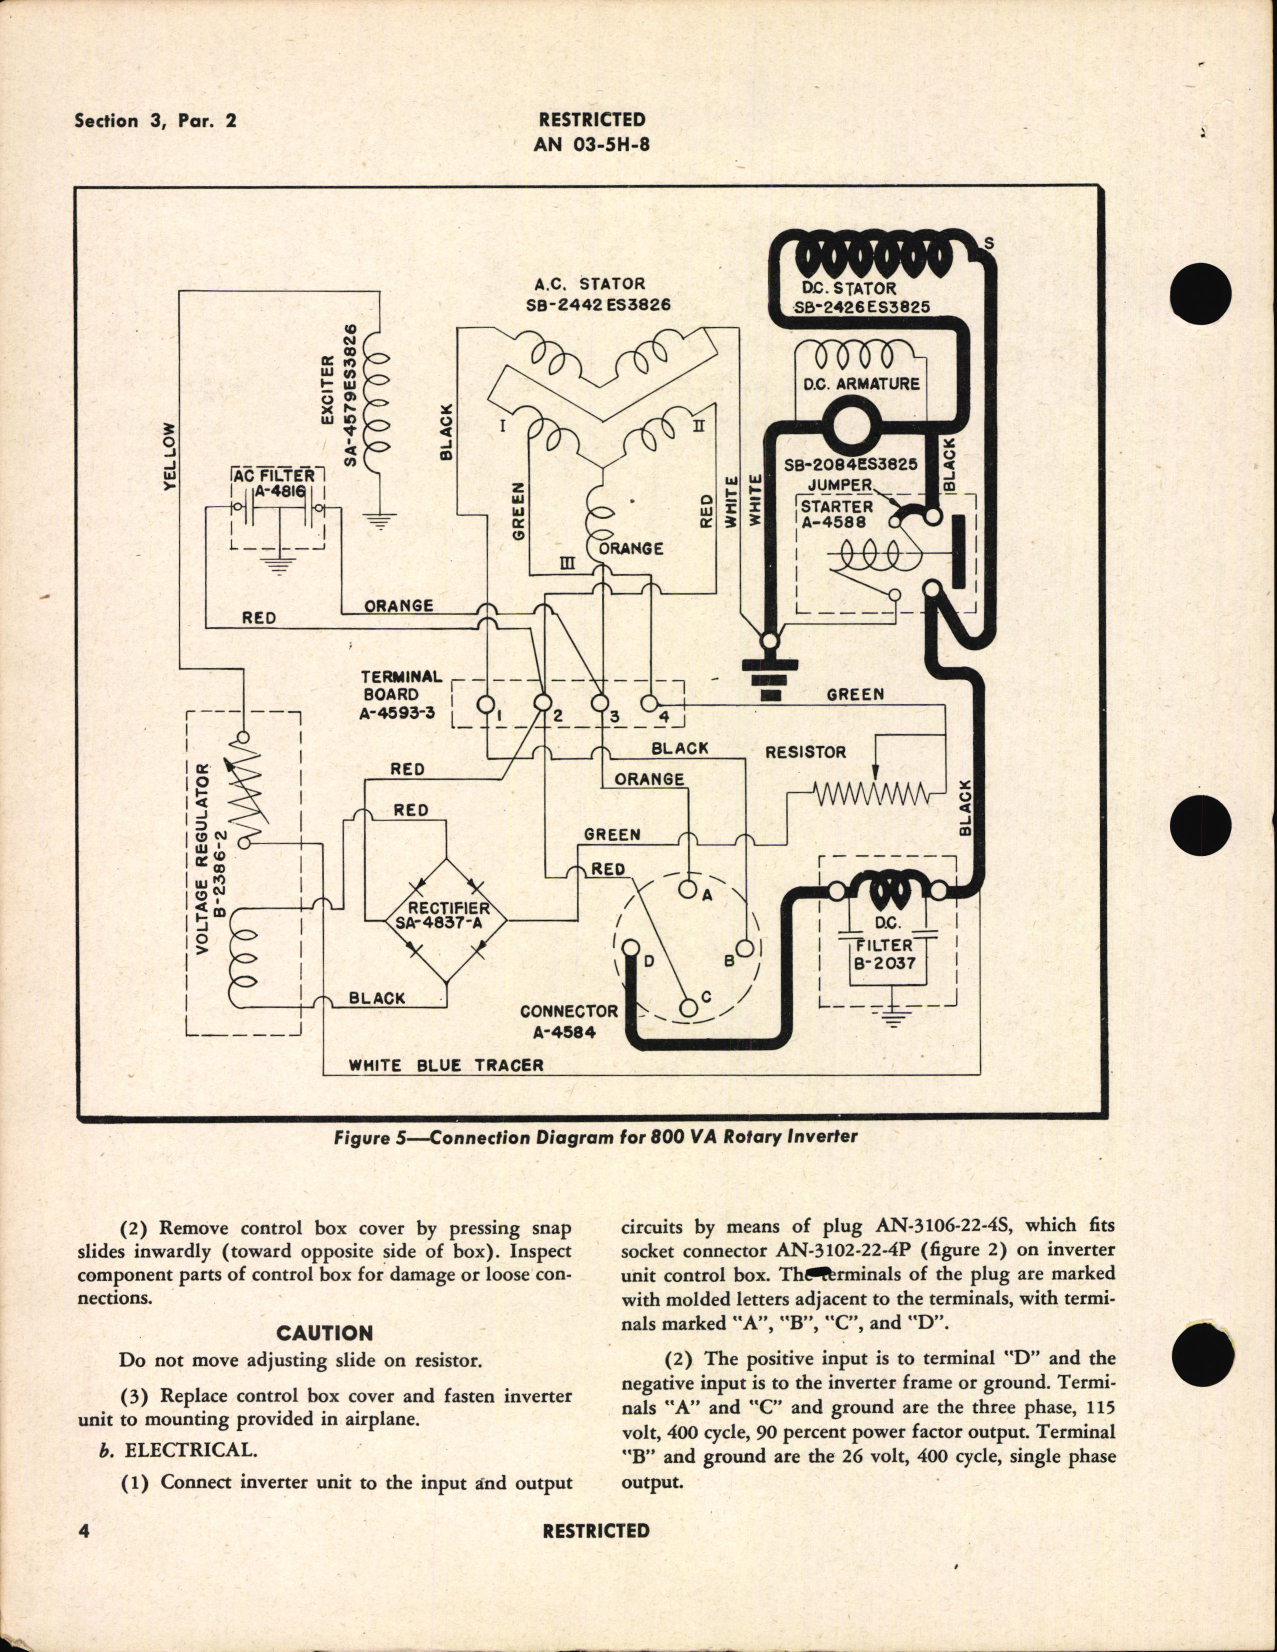 Sample page 8 from AirCorps Library document: Handbook of Instructions with Parts Catalog for 800 VA Rotary Inverter